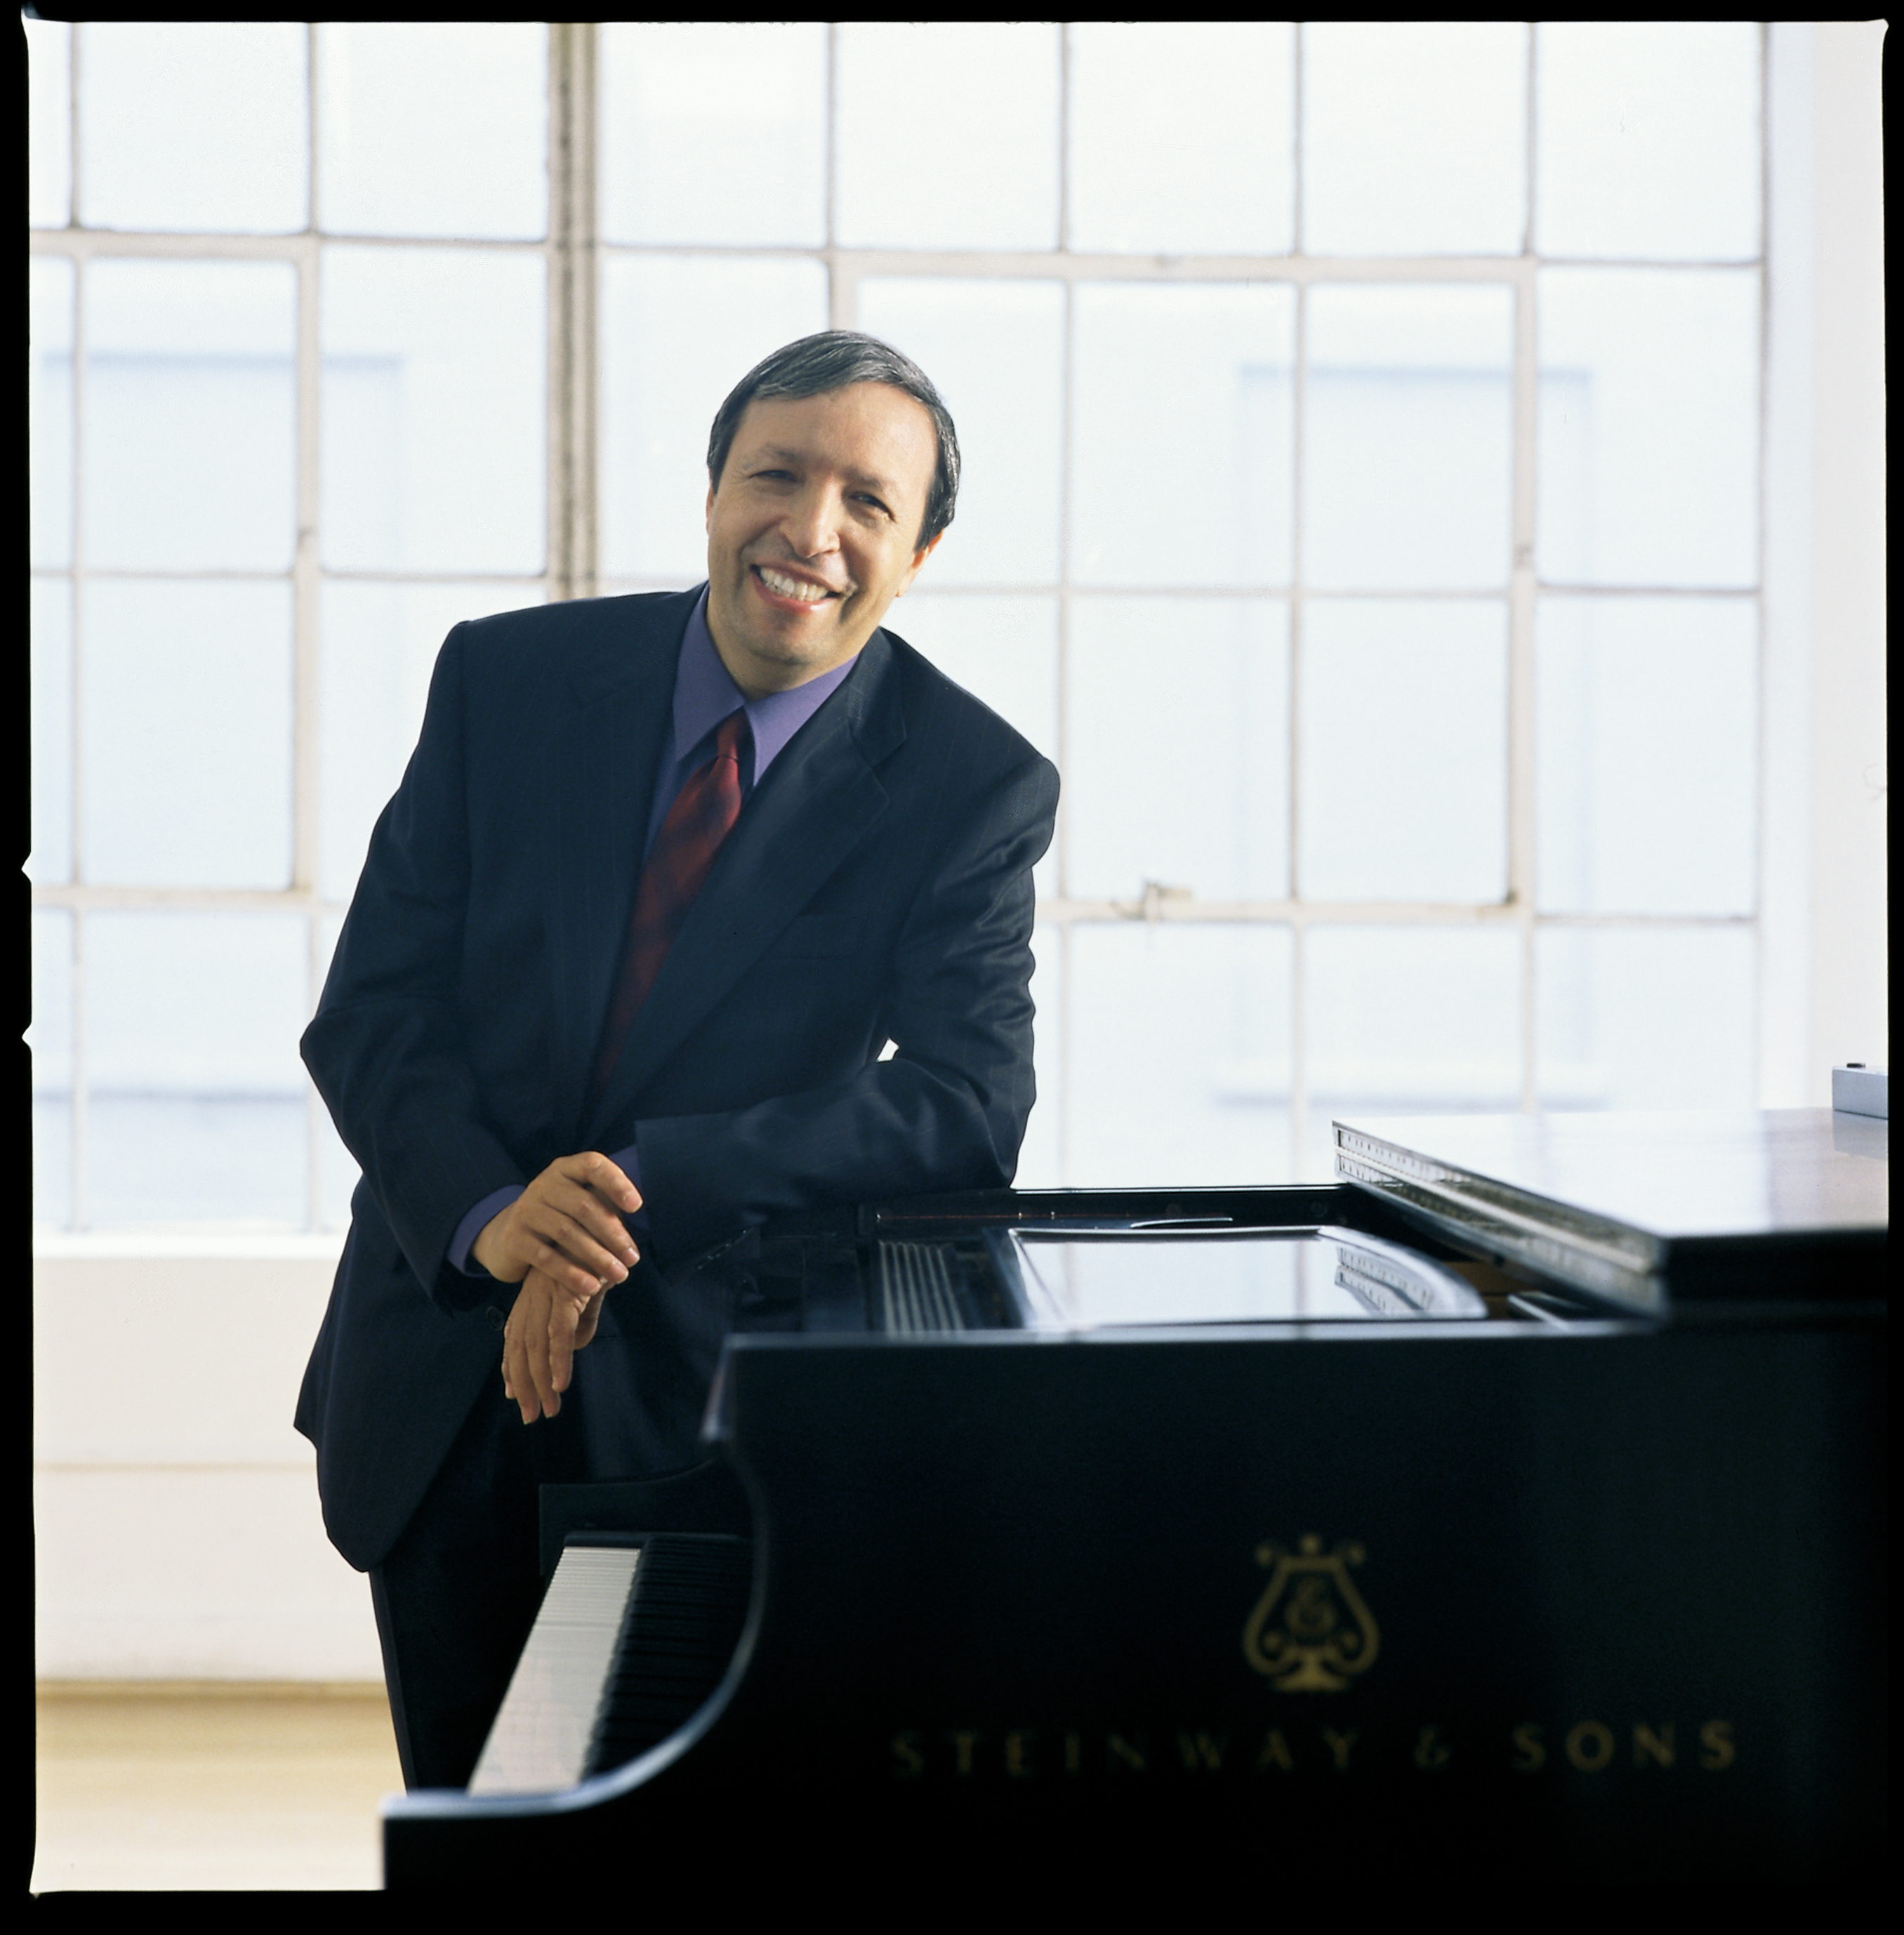 Murray Perahia: A Conversation with Music - The Center for the